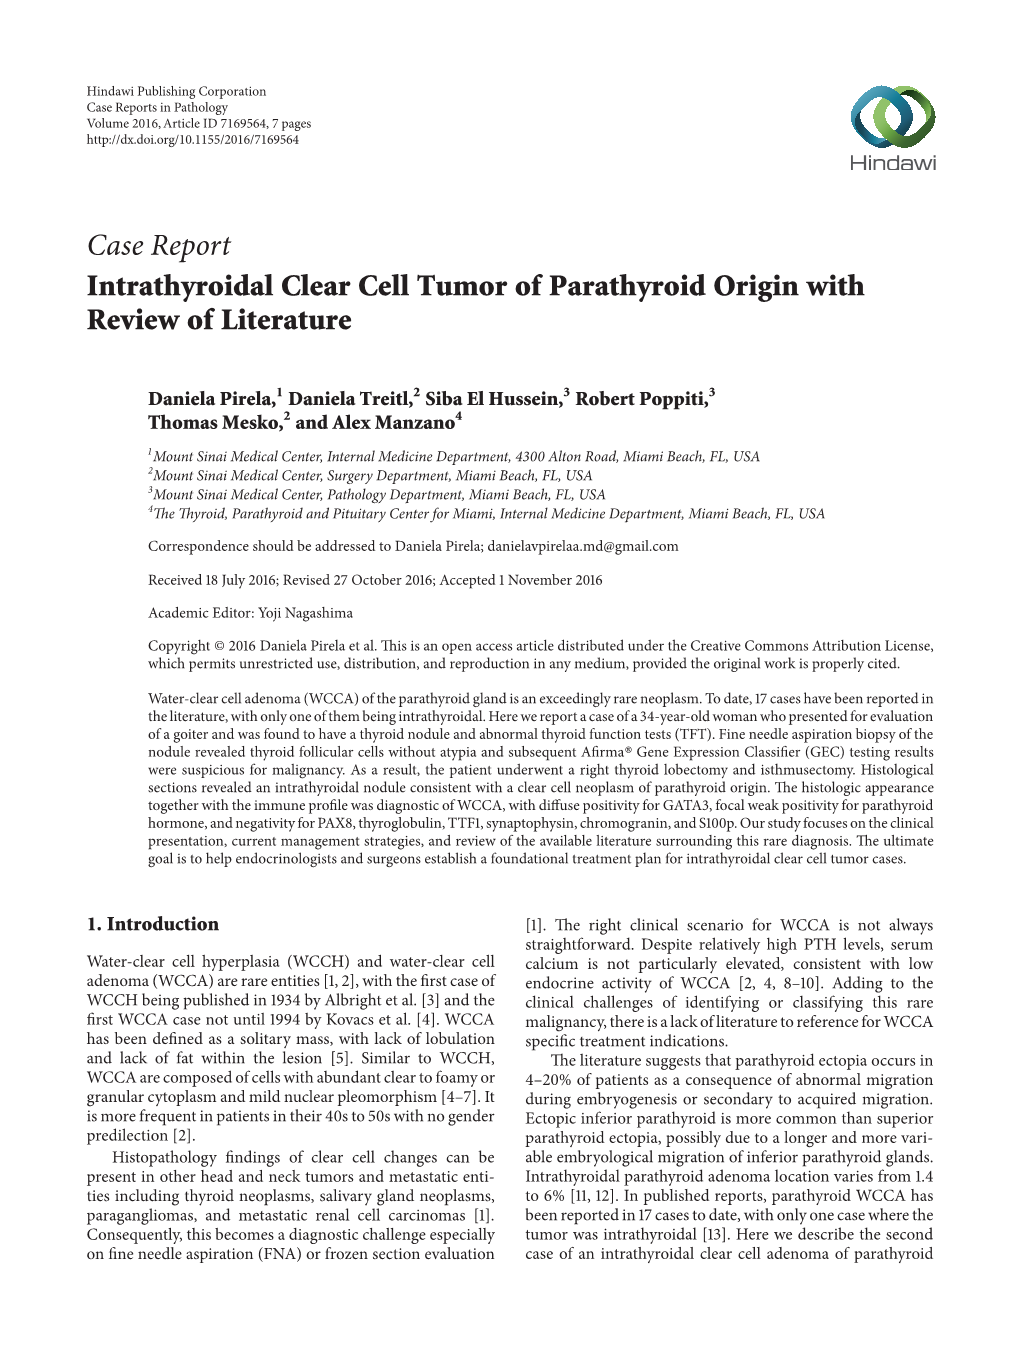 Intrathyroidal Clear Cell Tumor of Parathyroid Origin with Review of Literature